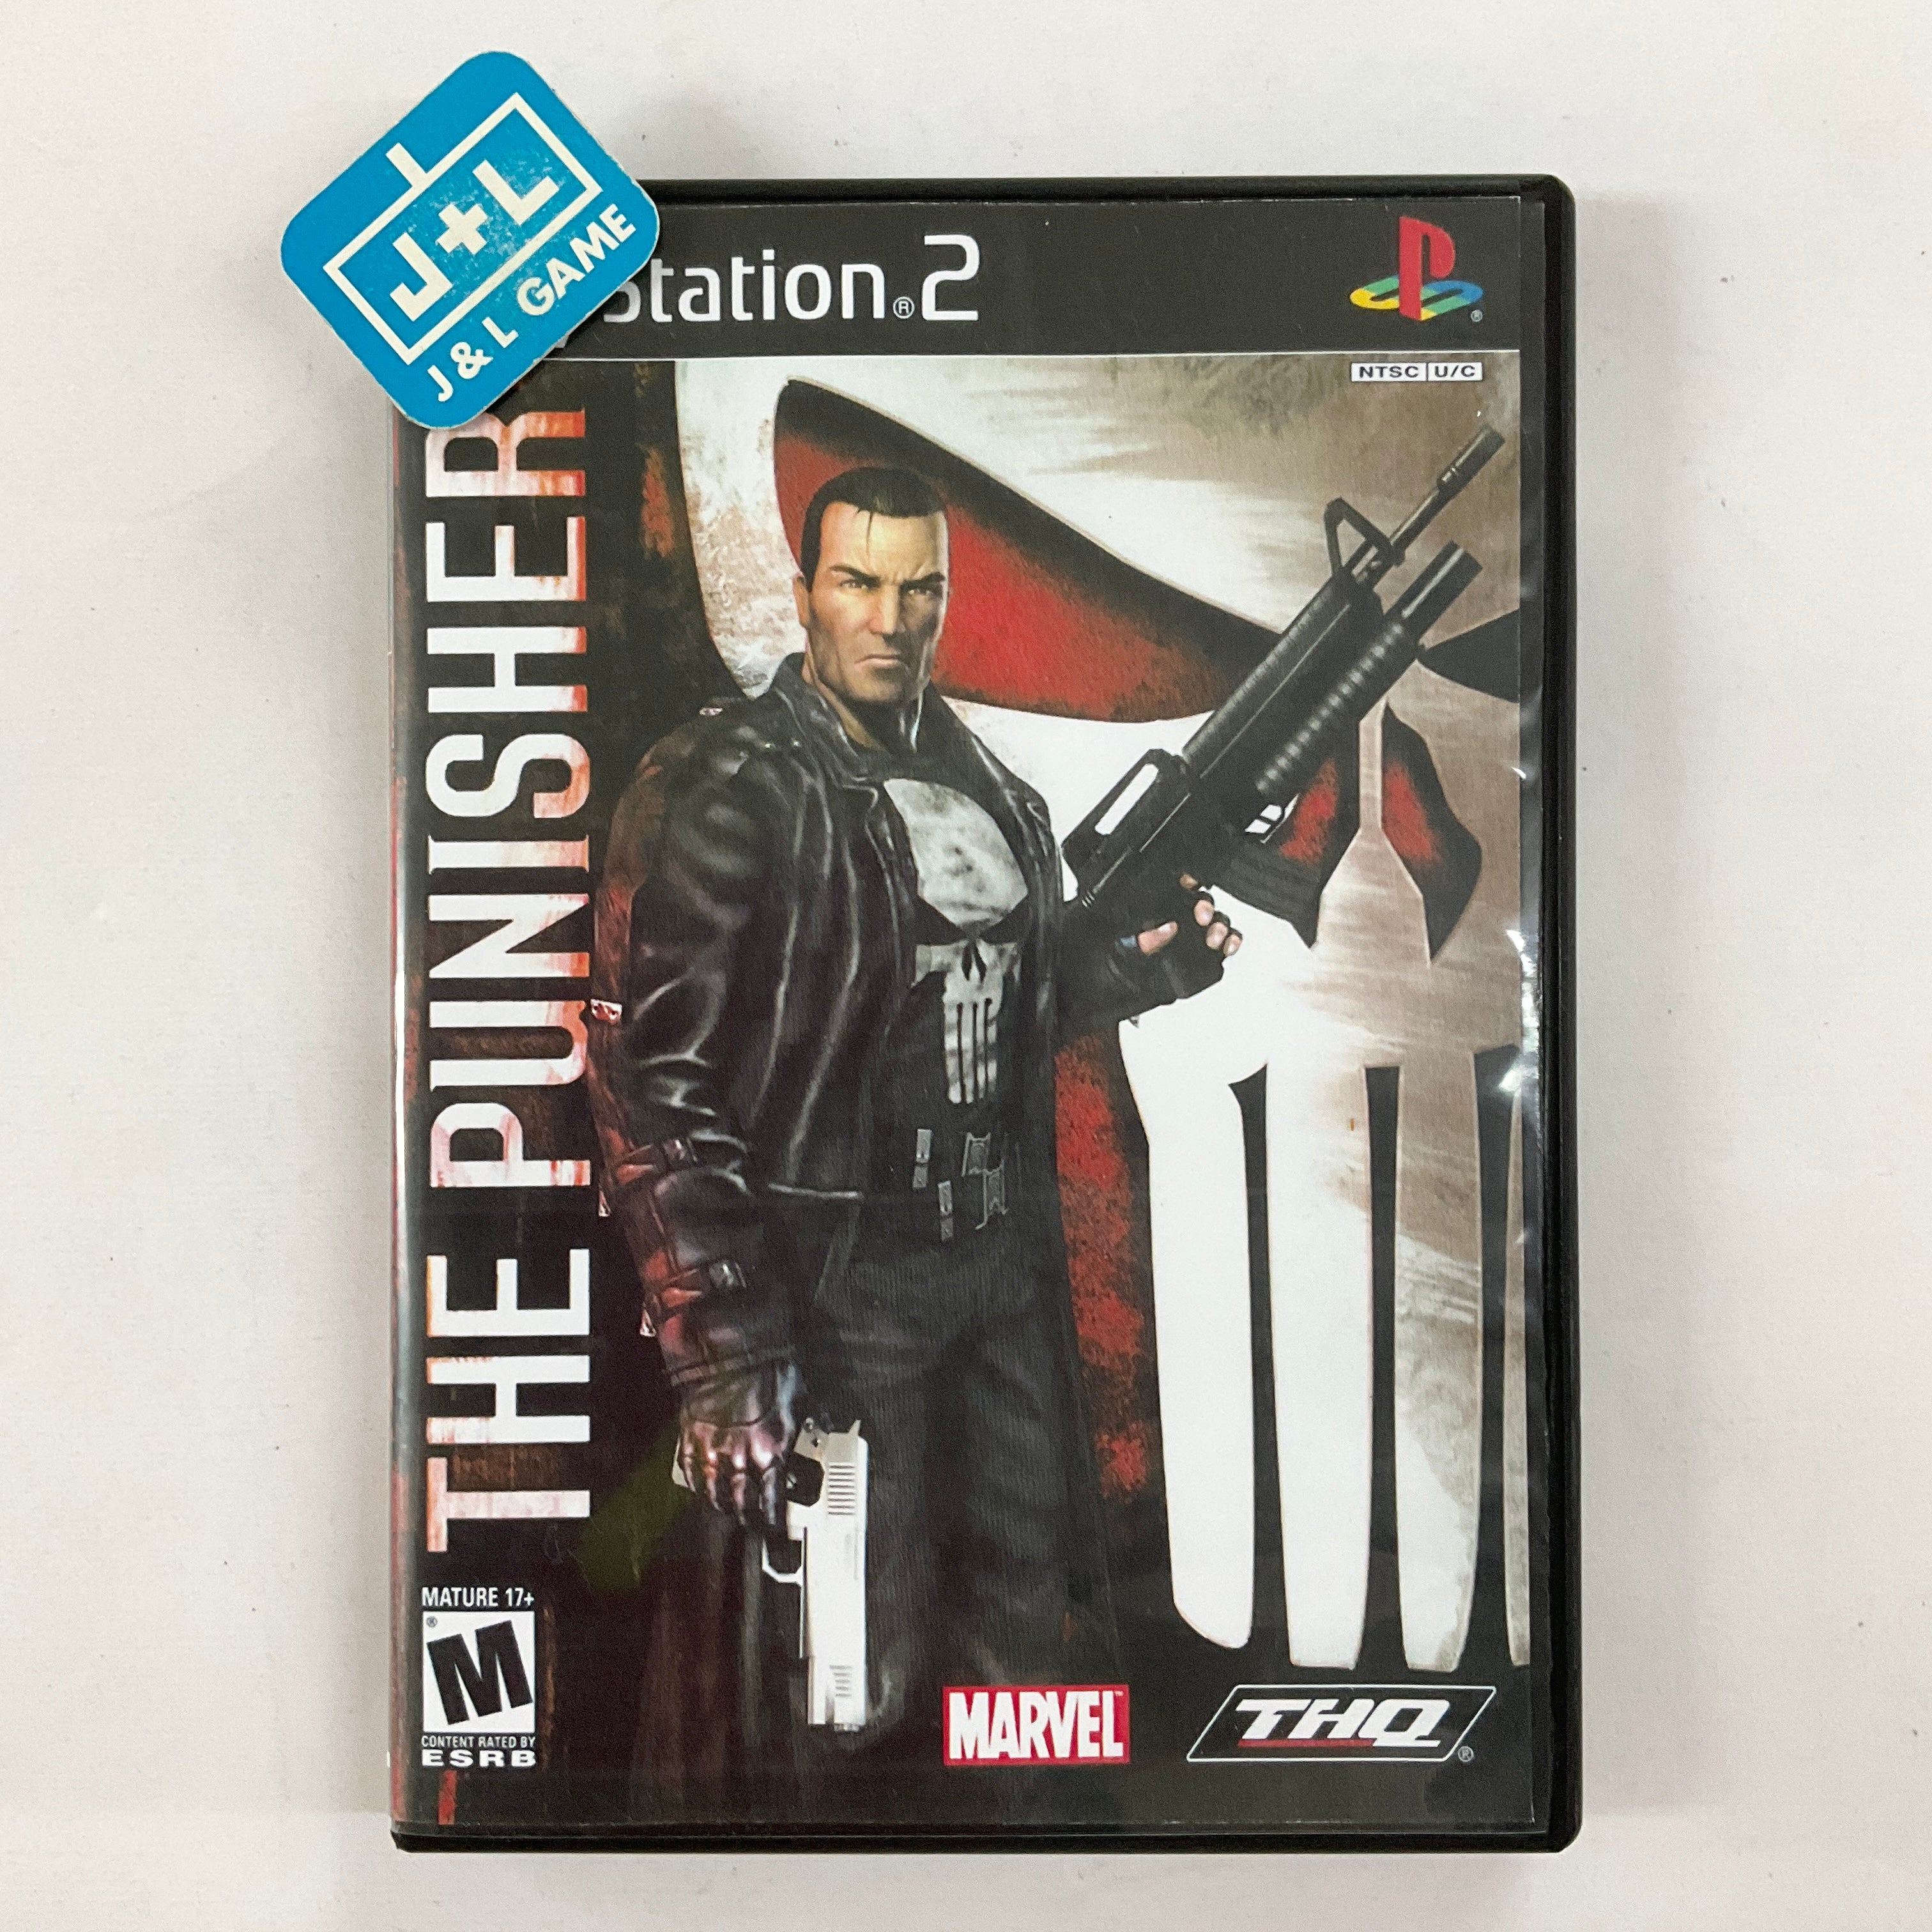 The Punisher - (PS2) PlayStation 2 [Pre-Owned] Video Games THQ   